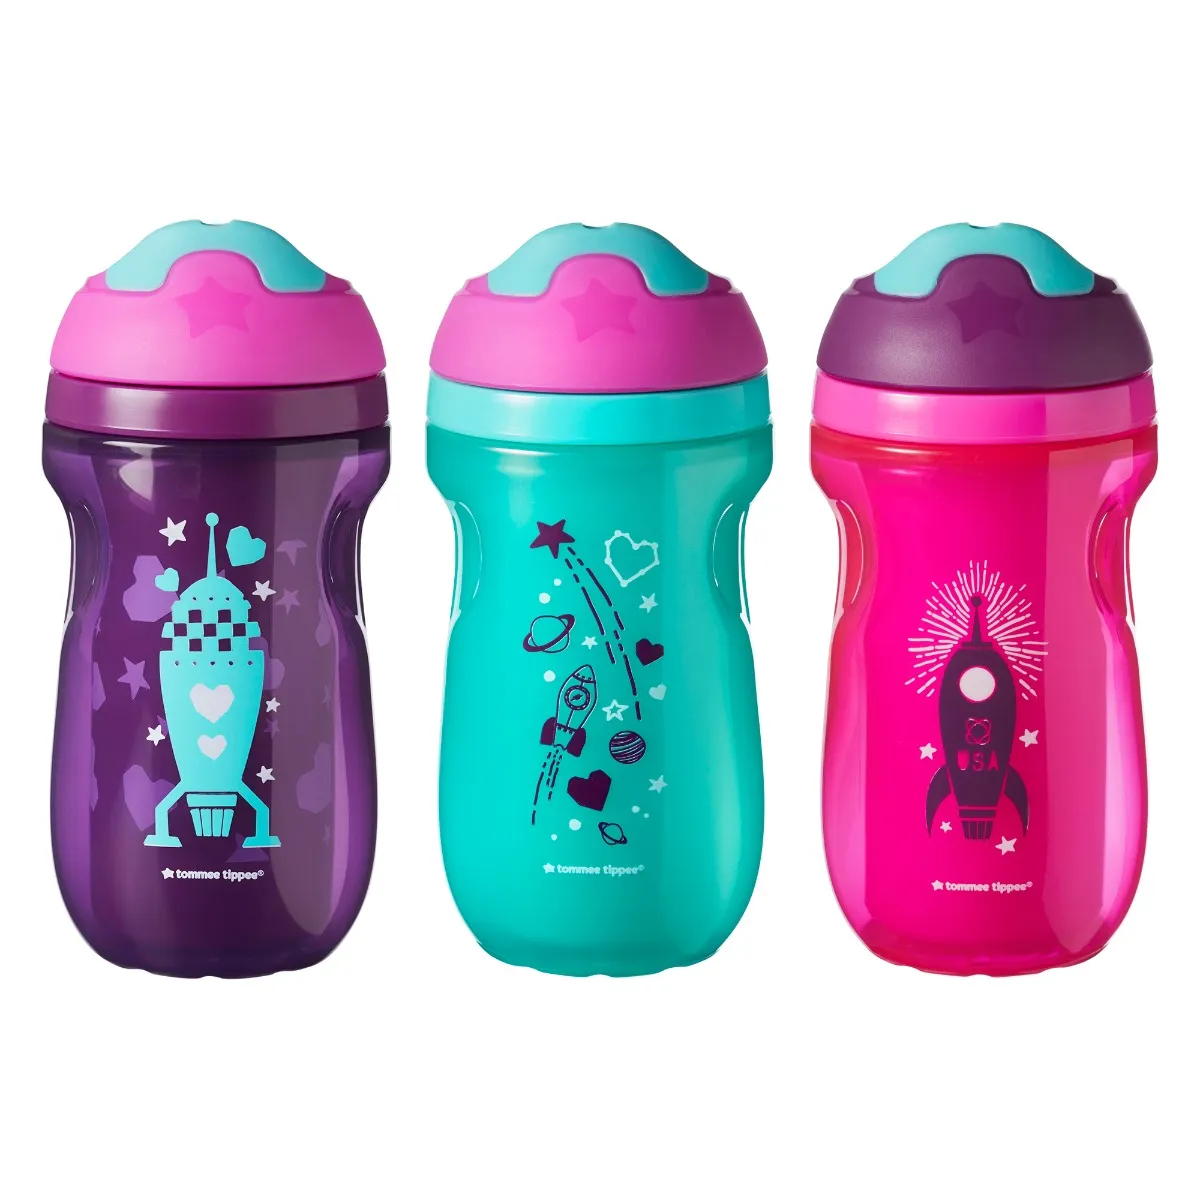 https://secure.tommeetippee.com/media/catalog/product/5/4/549224_insulated_sippee_cup_3_pack_girl.jpg